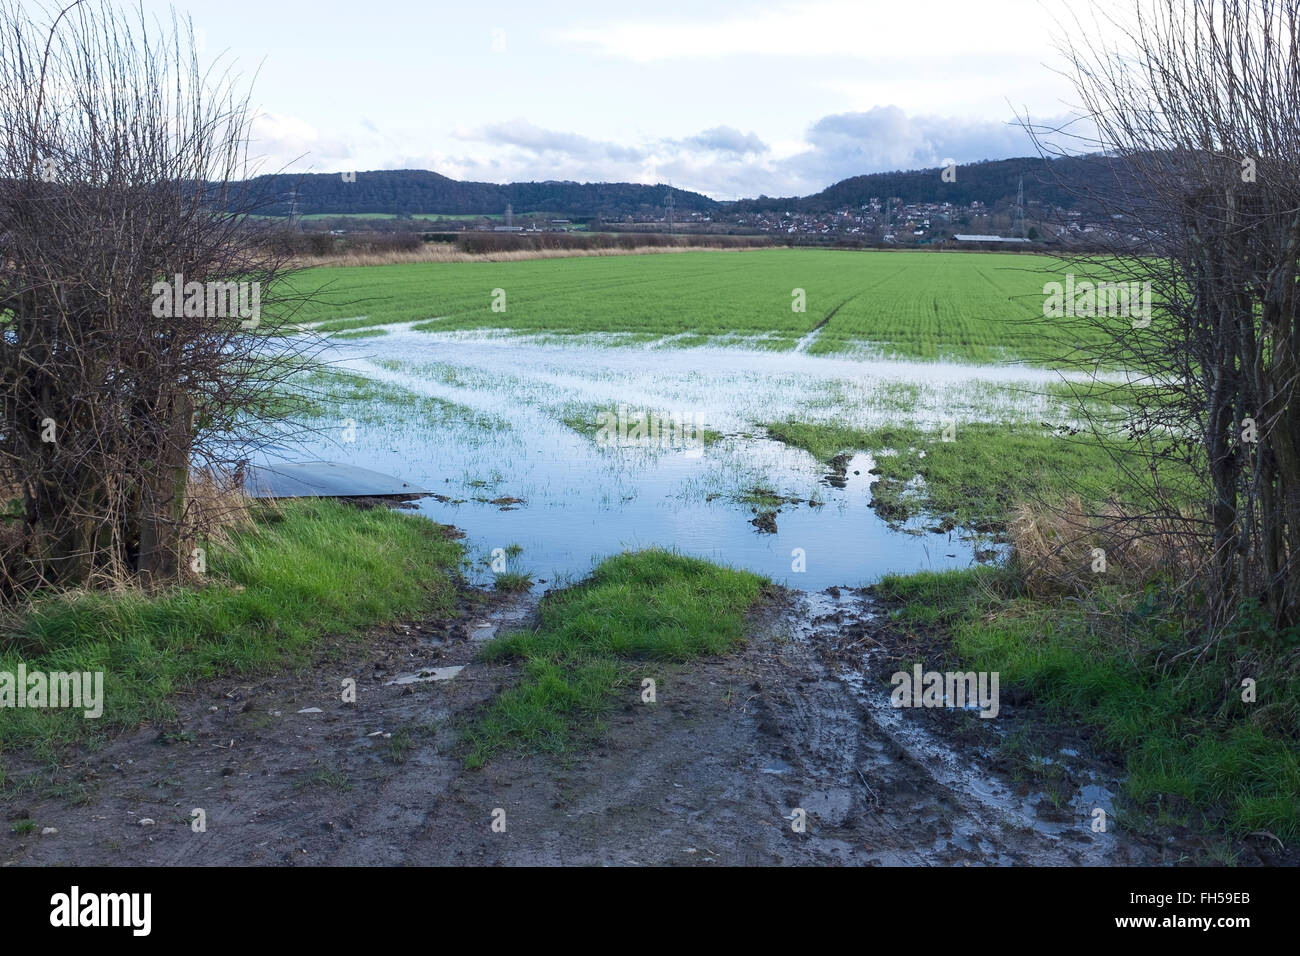 The entrance to a farmers field flooded with water Stock Photo